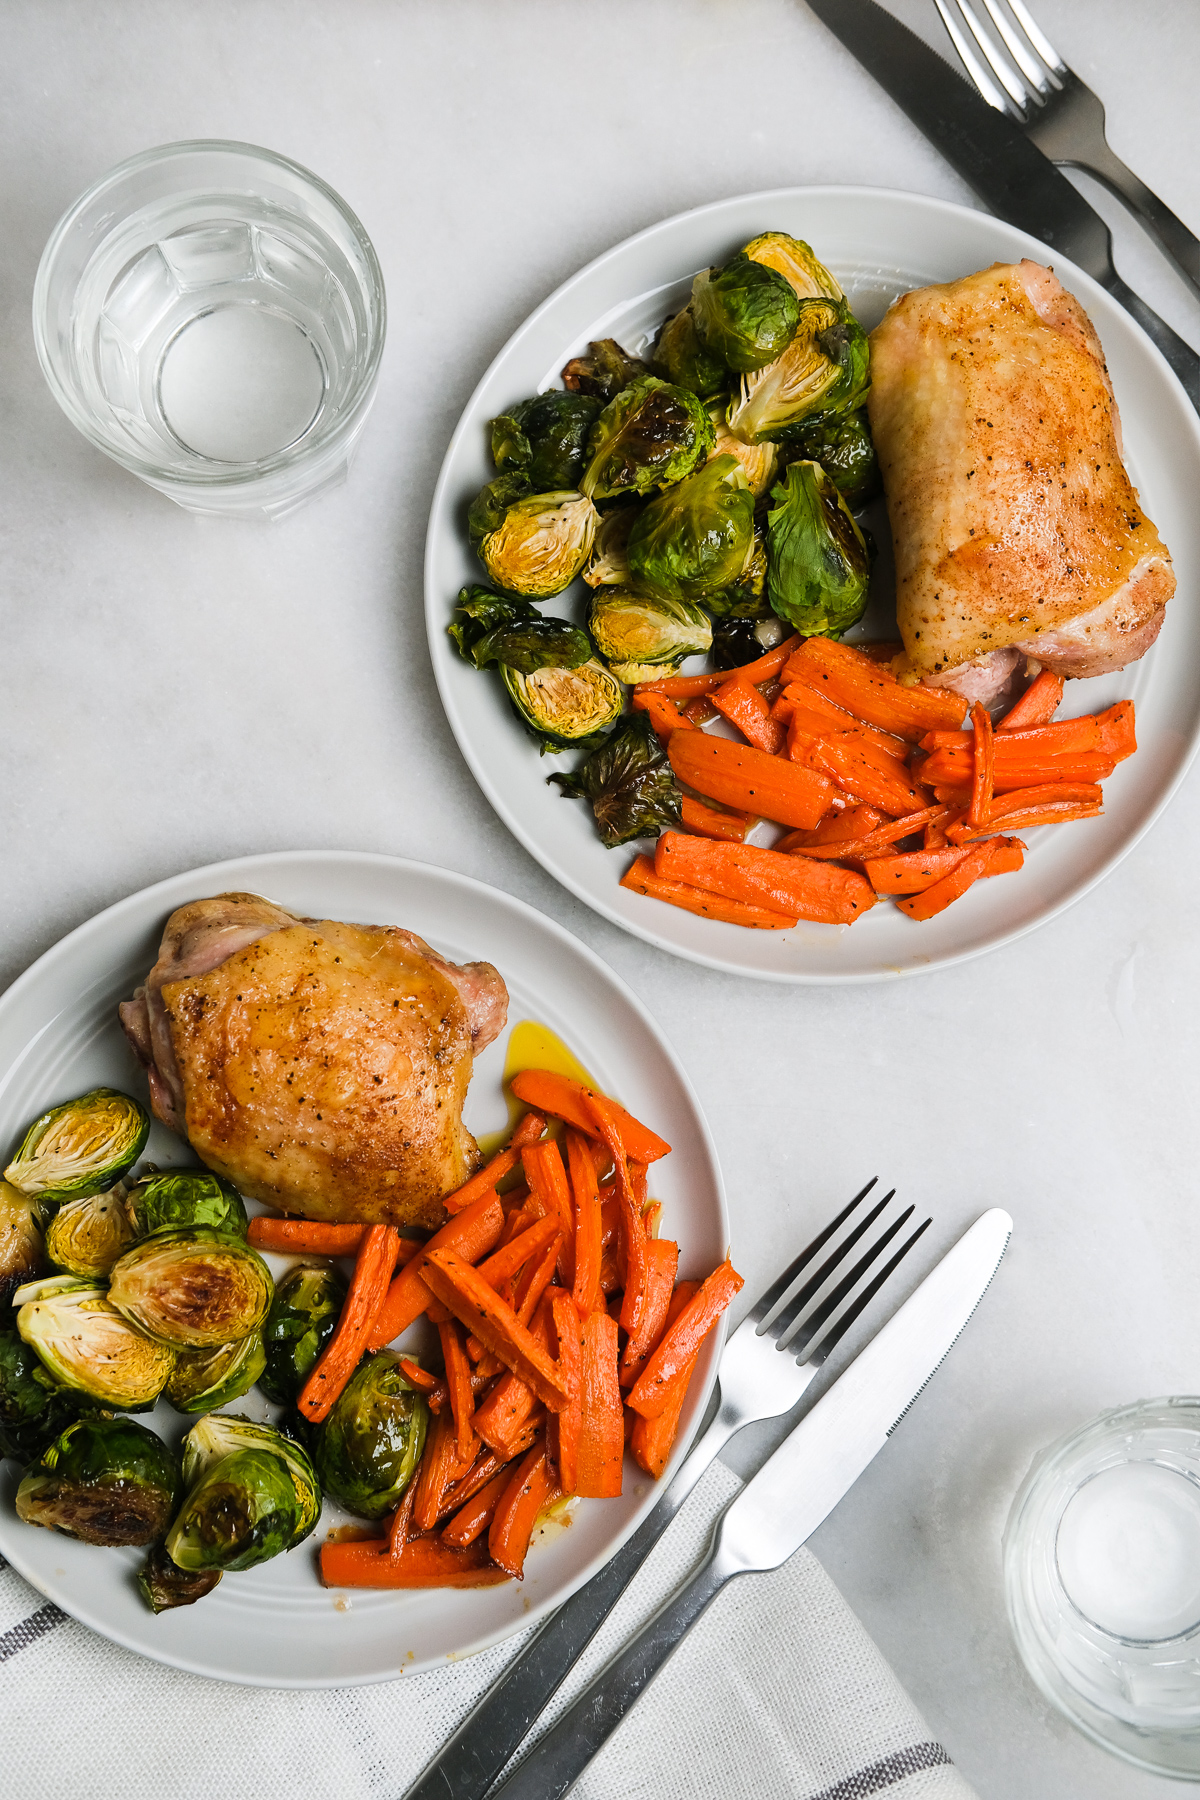 chicken thighs with roasted vegetables on plates ready to eat